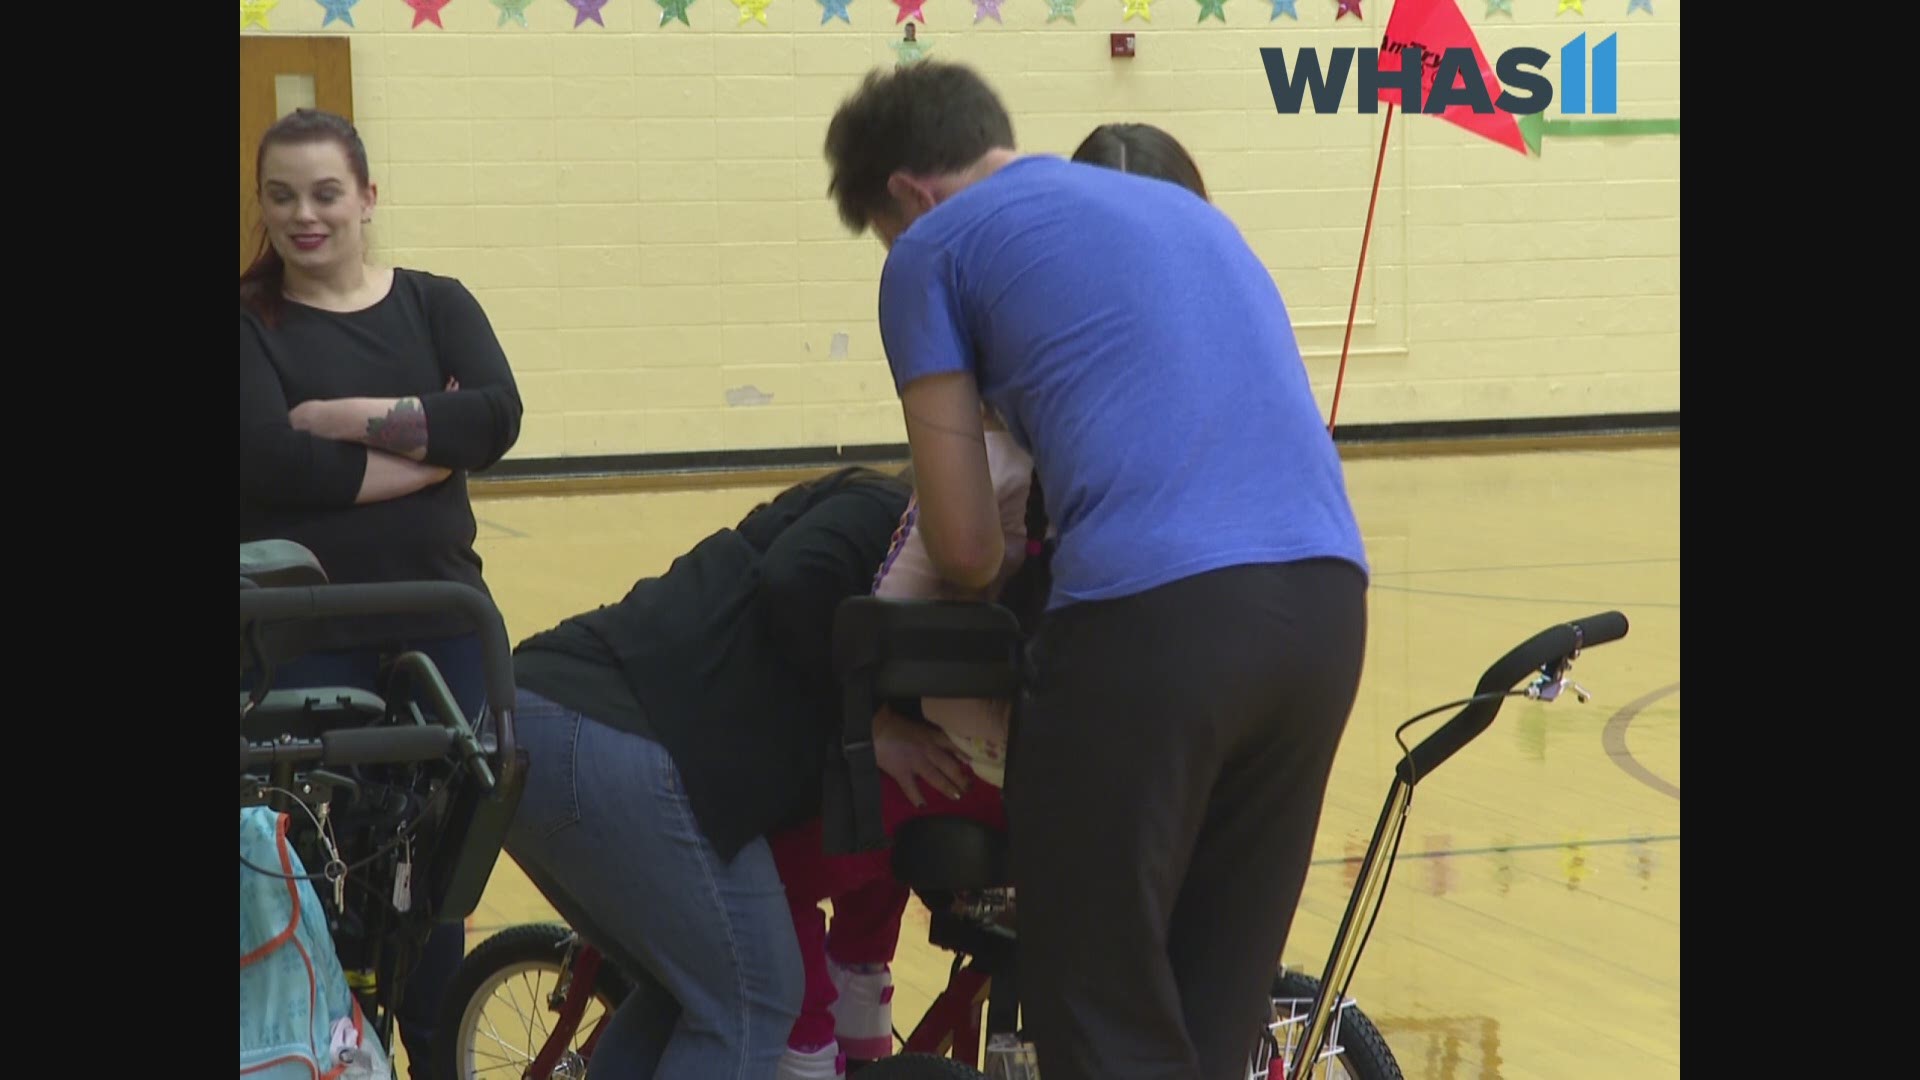 Hilary Patel has a disorder that triggers seizures and affects her movement. Kiwanis Club of Louisville, AMBUCS stepped in to provide Hilary with a specialized bike.